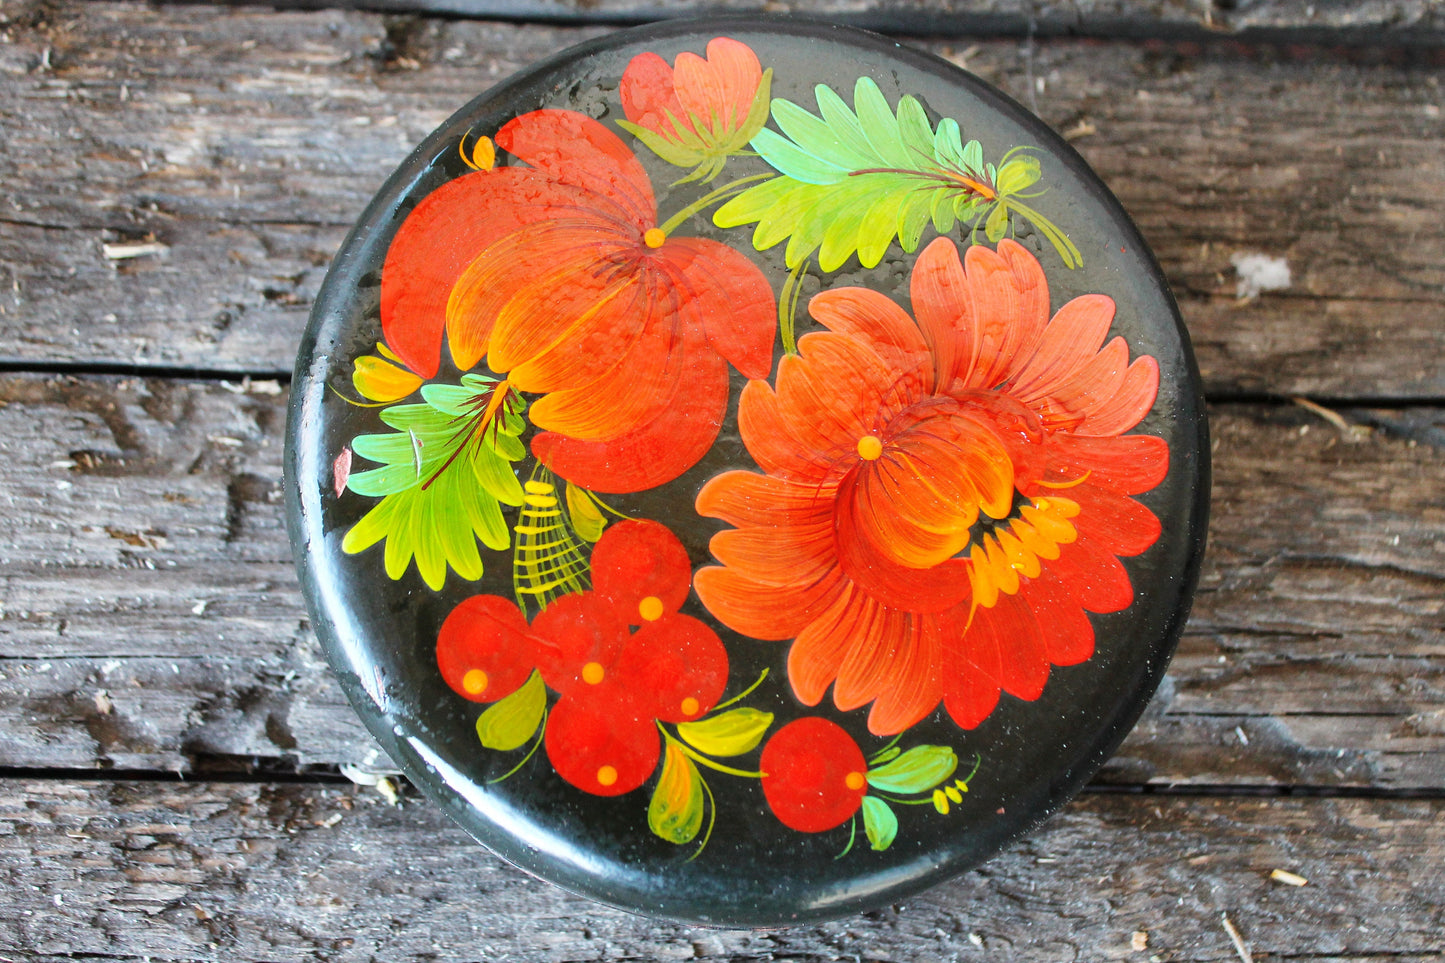 Vintage round  jewelry wooden box 5.7 inches - Petrykivka box - USSR vintage - vintage flower box - handpainted box